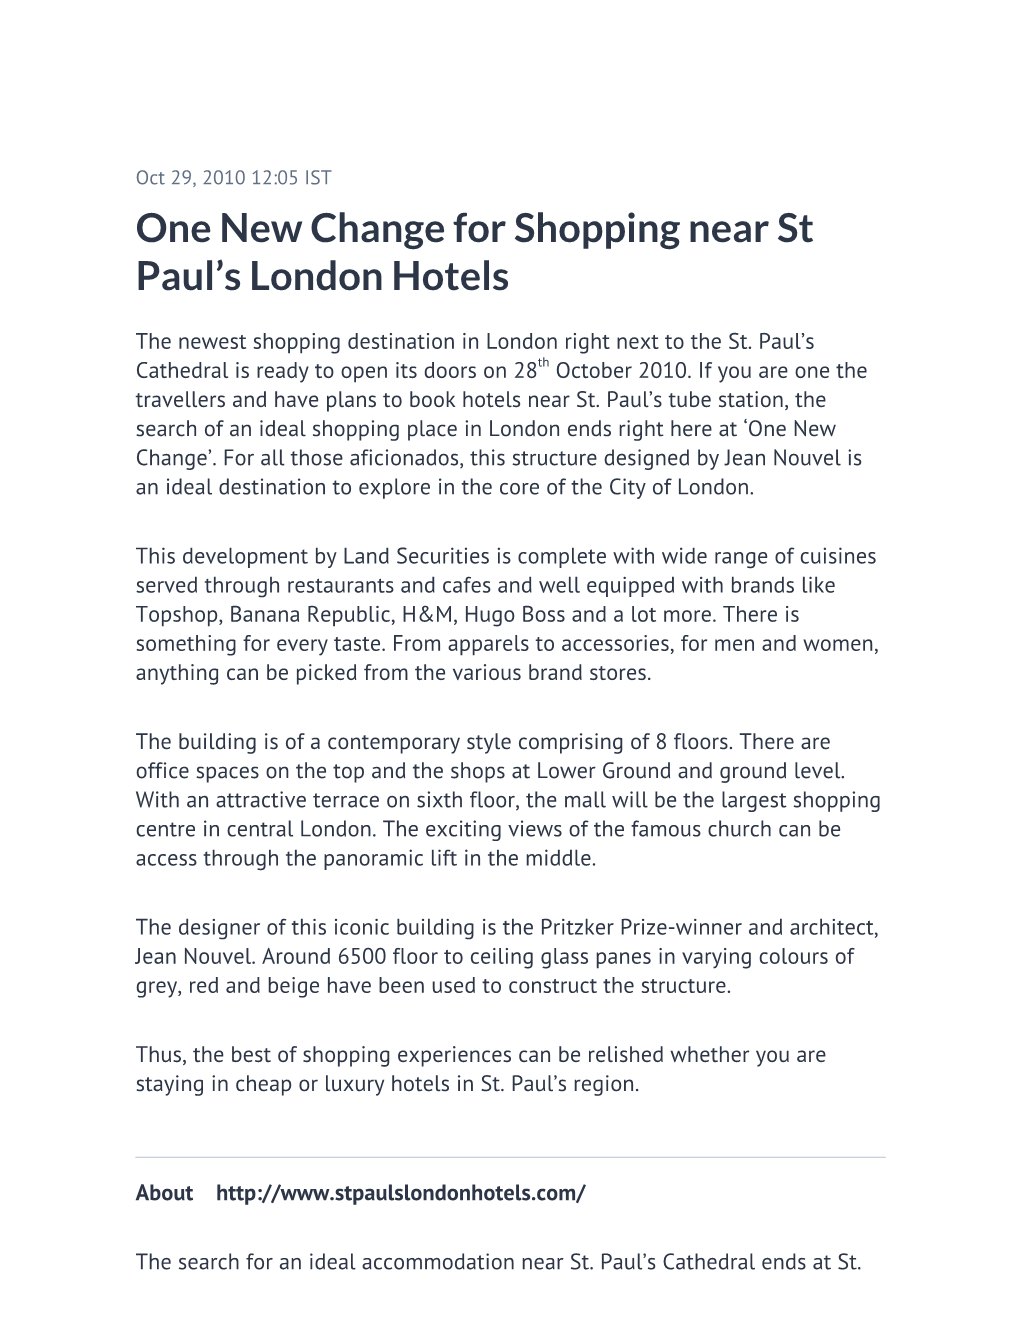 One New Change for Shopping Near St Paul's London Hotels